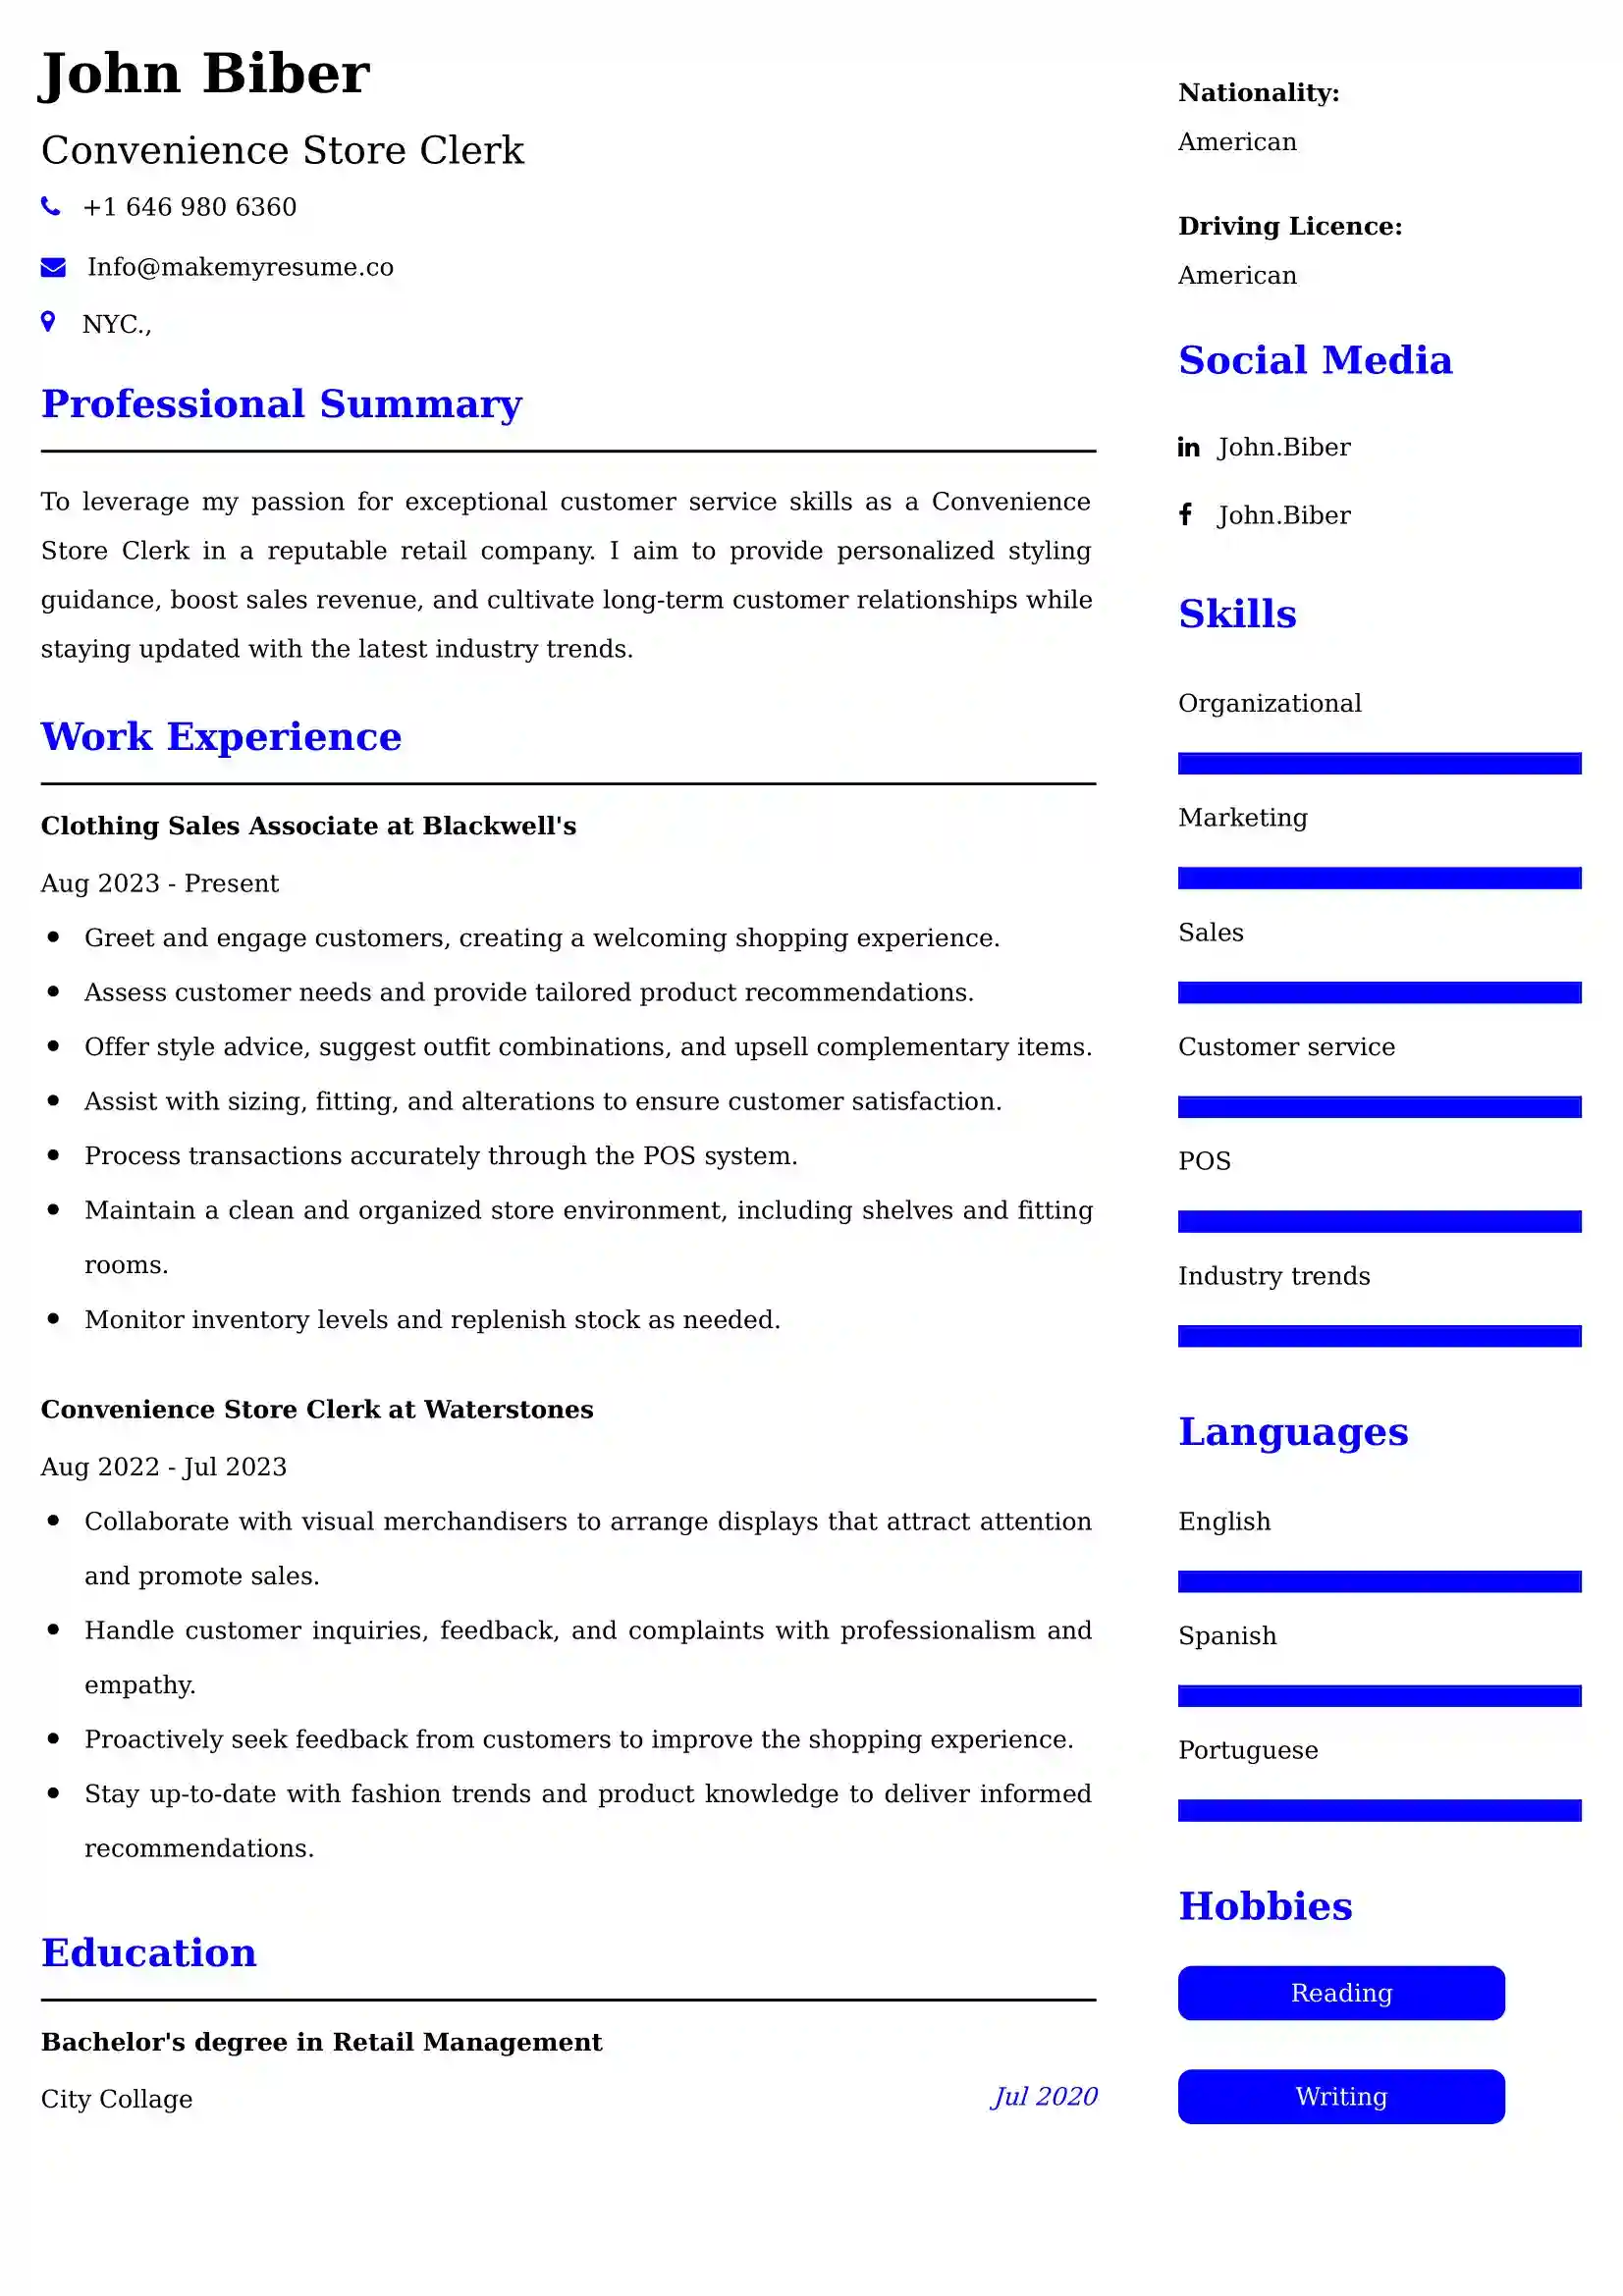 Convenience Store Clerk Resume Examples - UK Format, Latest Template.